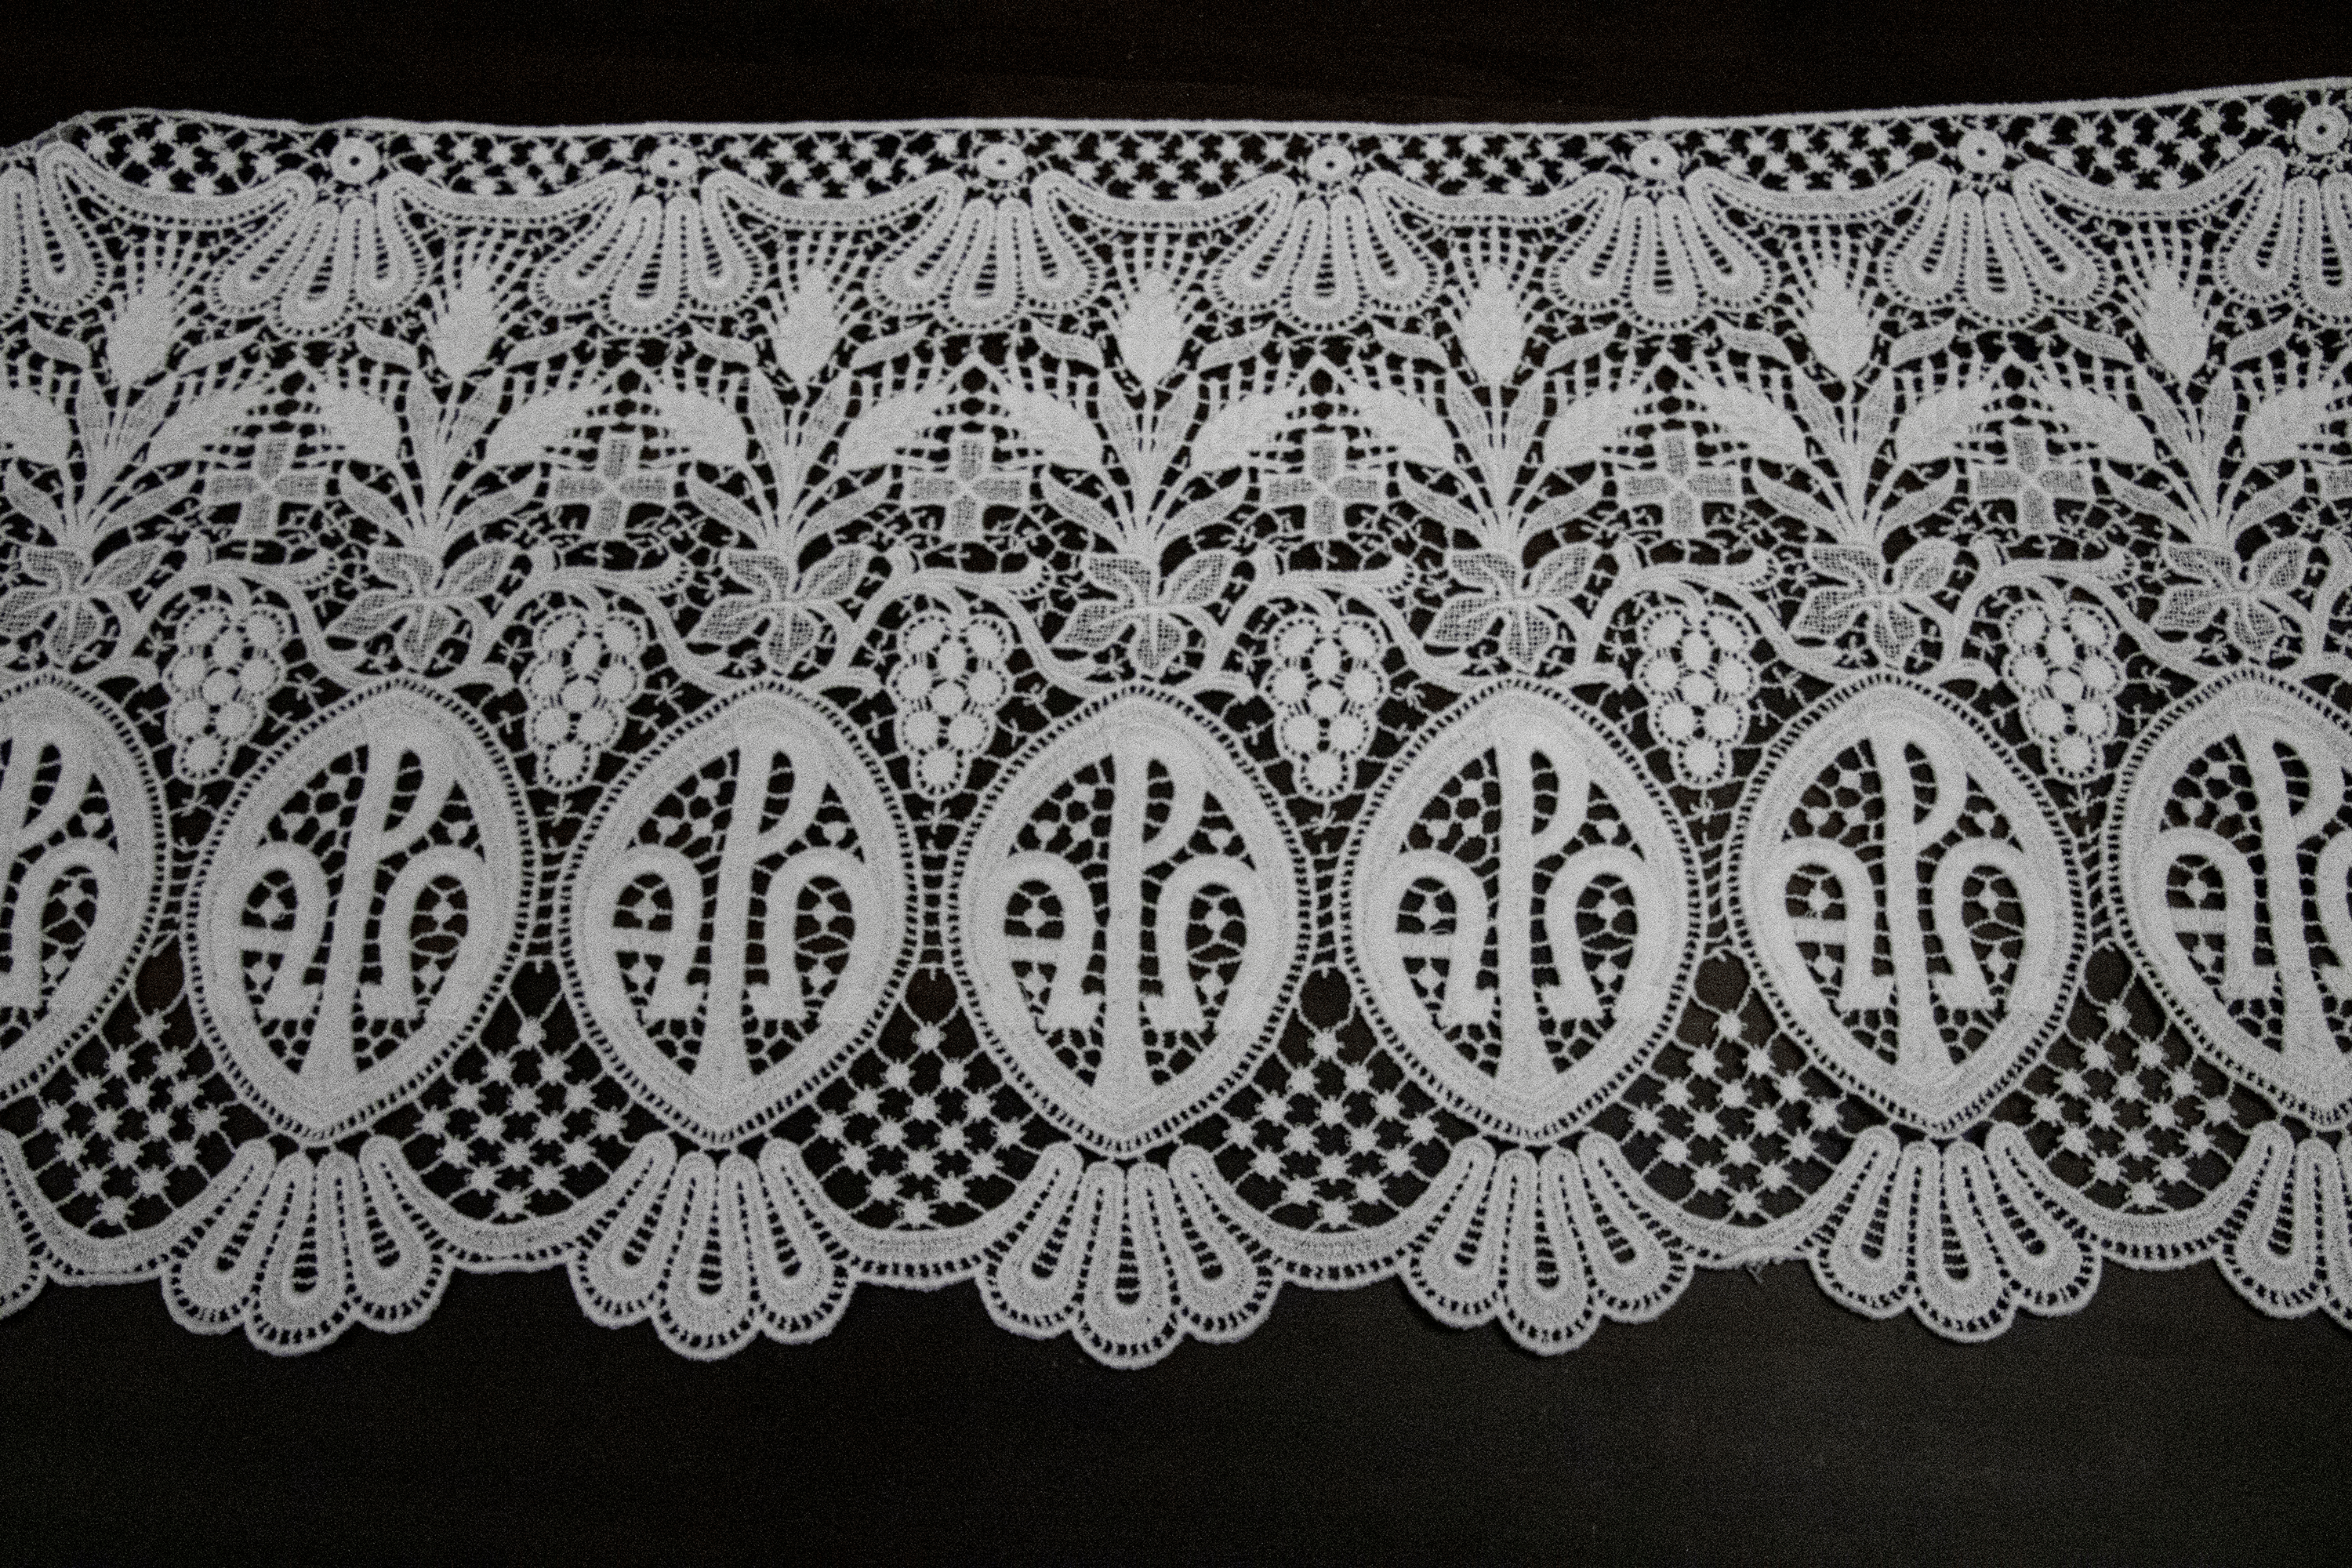 https://www.ecclesiasticalsewing.com/cdn/shop/files/lace-edging-and-insertion-lace-for-surplices-and-rochets-ecclesiastical-sewing-2-31790293188864.png?v=1699394231